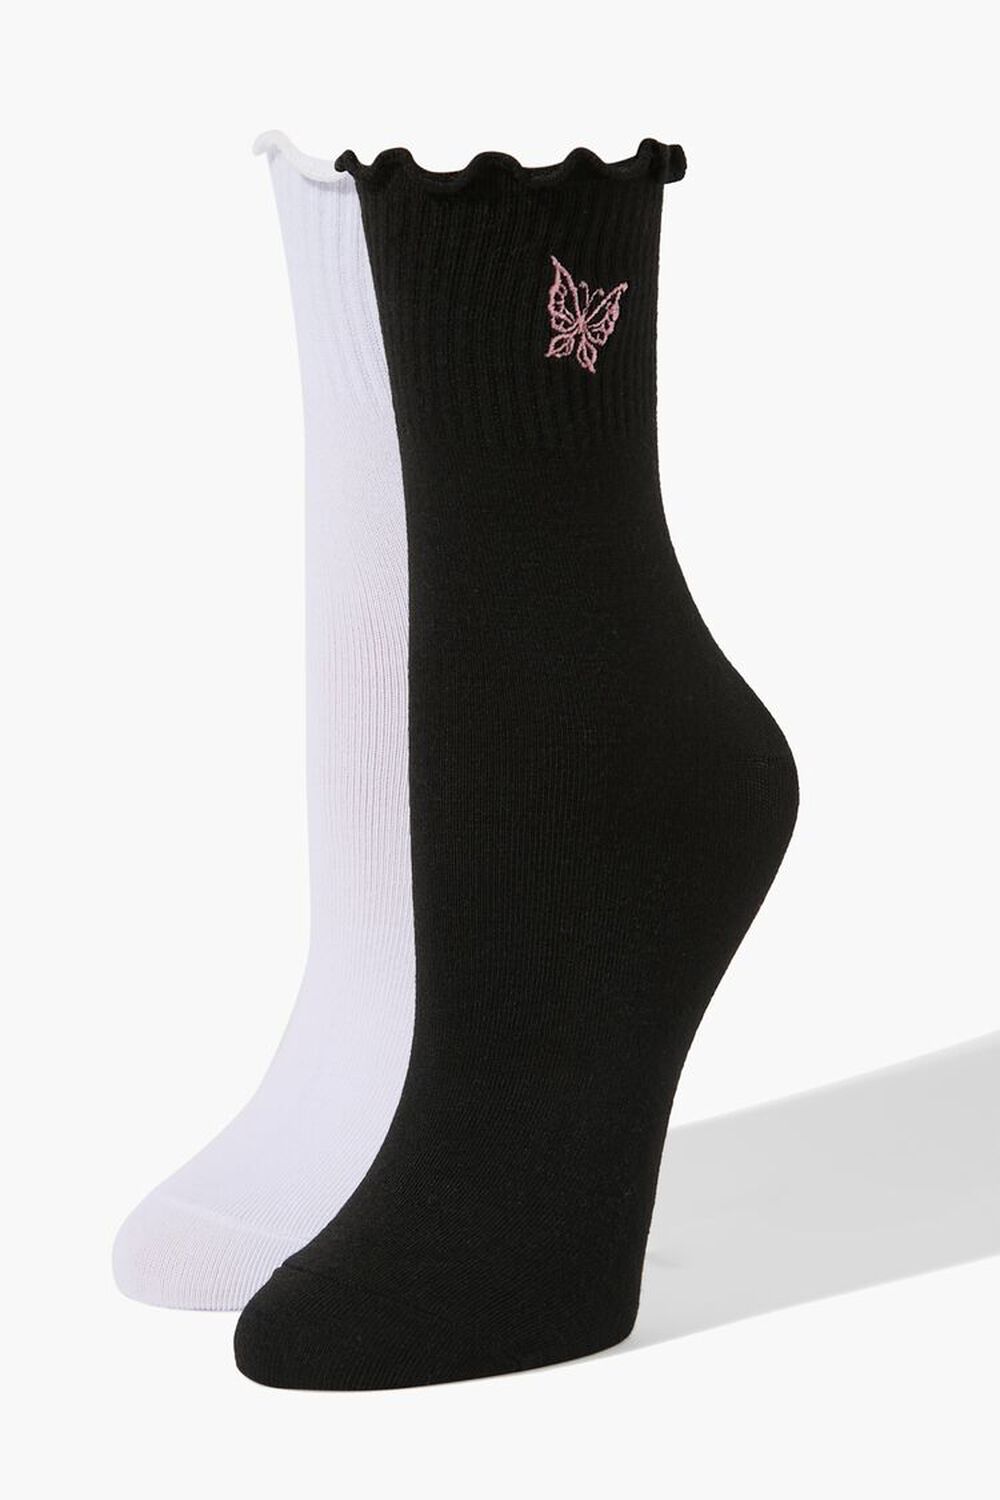 Butterfly Crew Sock Set - 2 pack, image 1